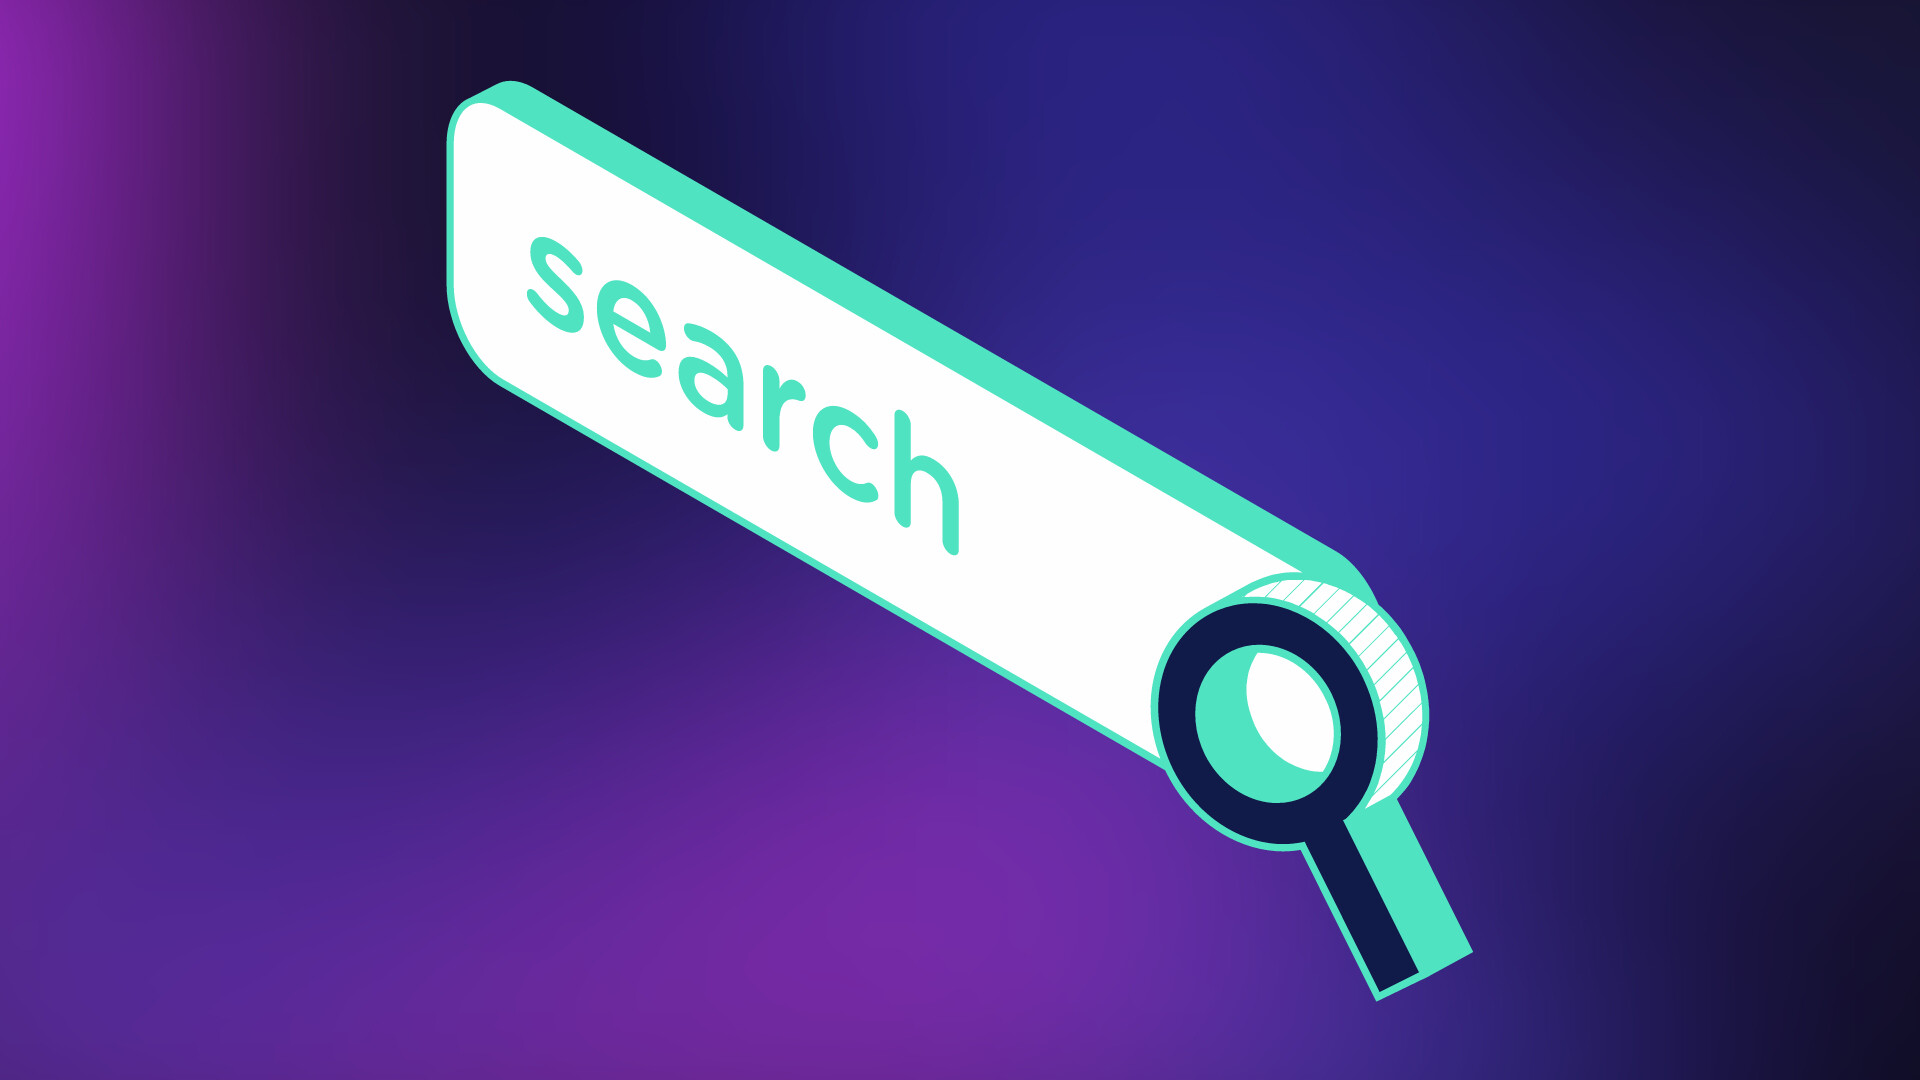 What is the first tool you use to search for information on the Internet?